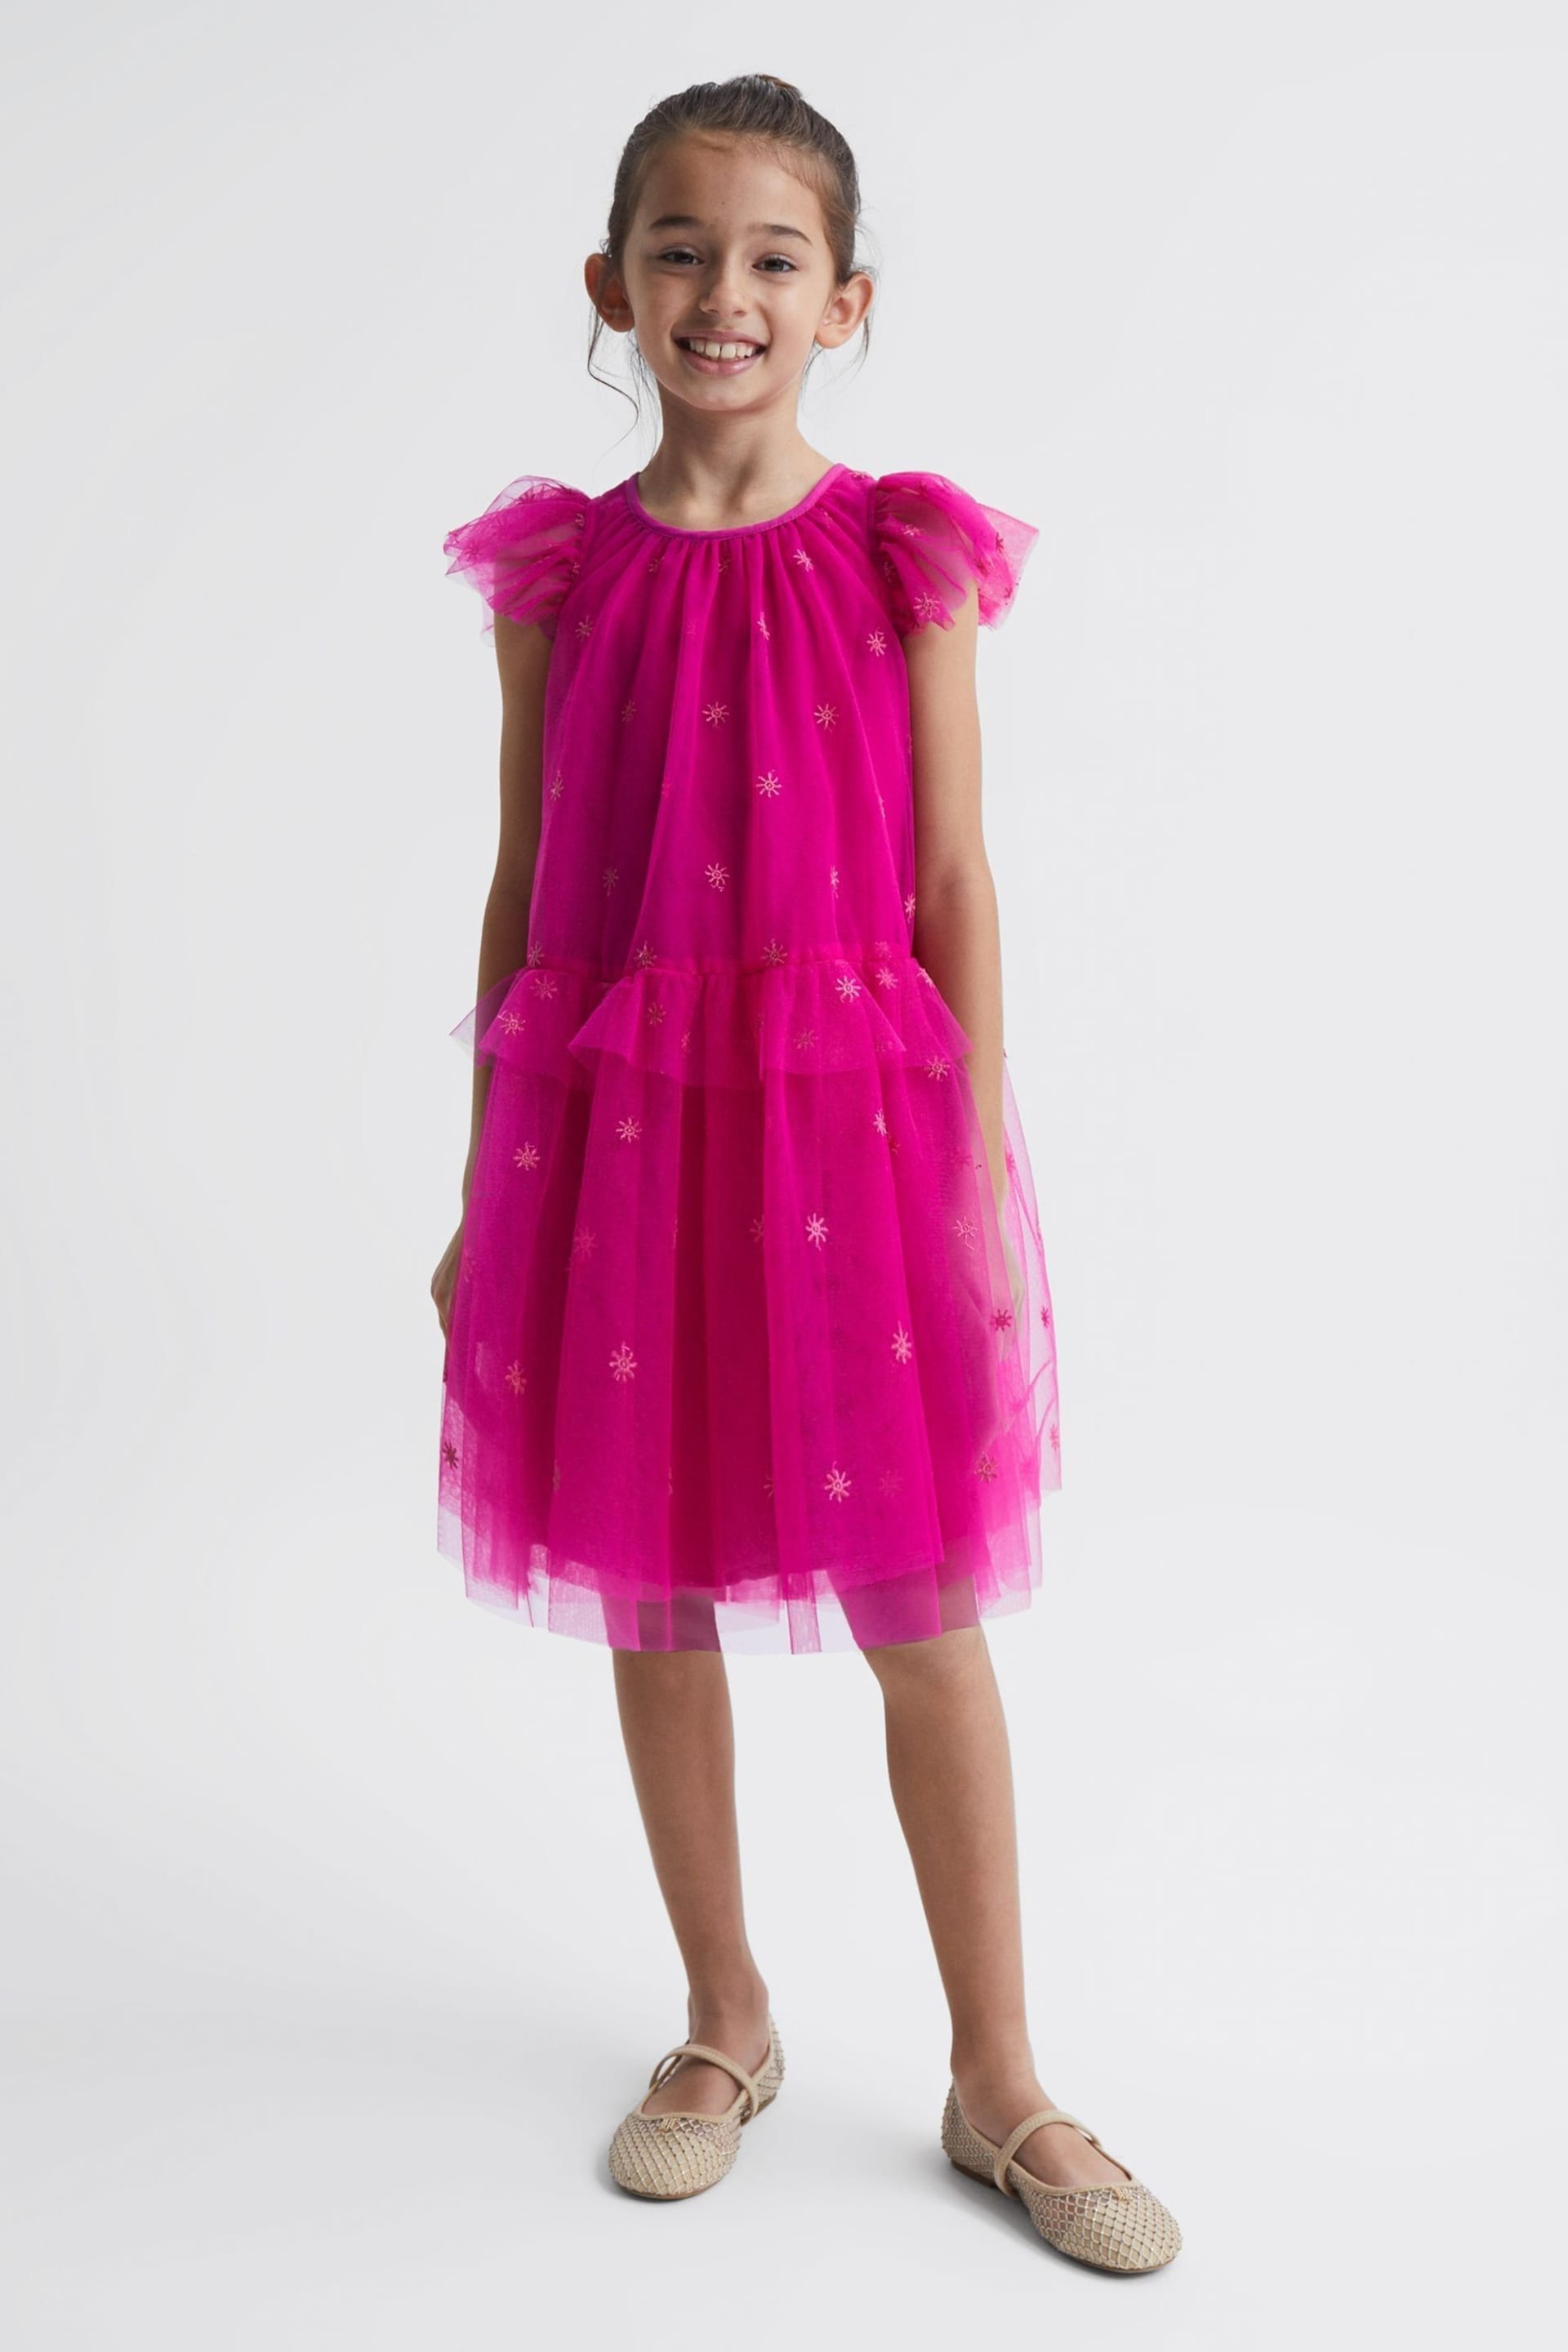 Reiss Bright Pink Fifi Senior Tulle Embroidered Dress - Image 3 of 7